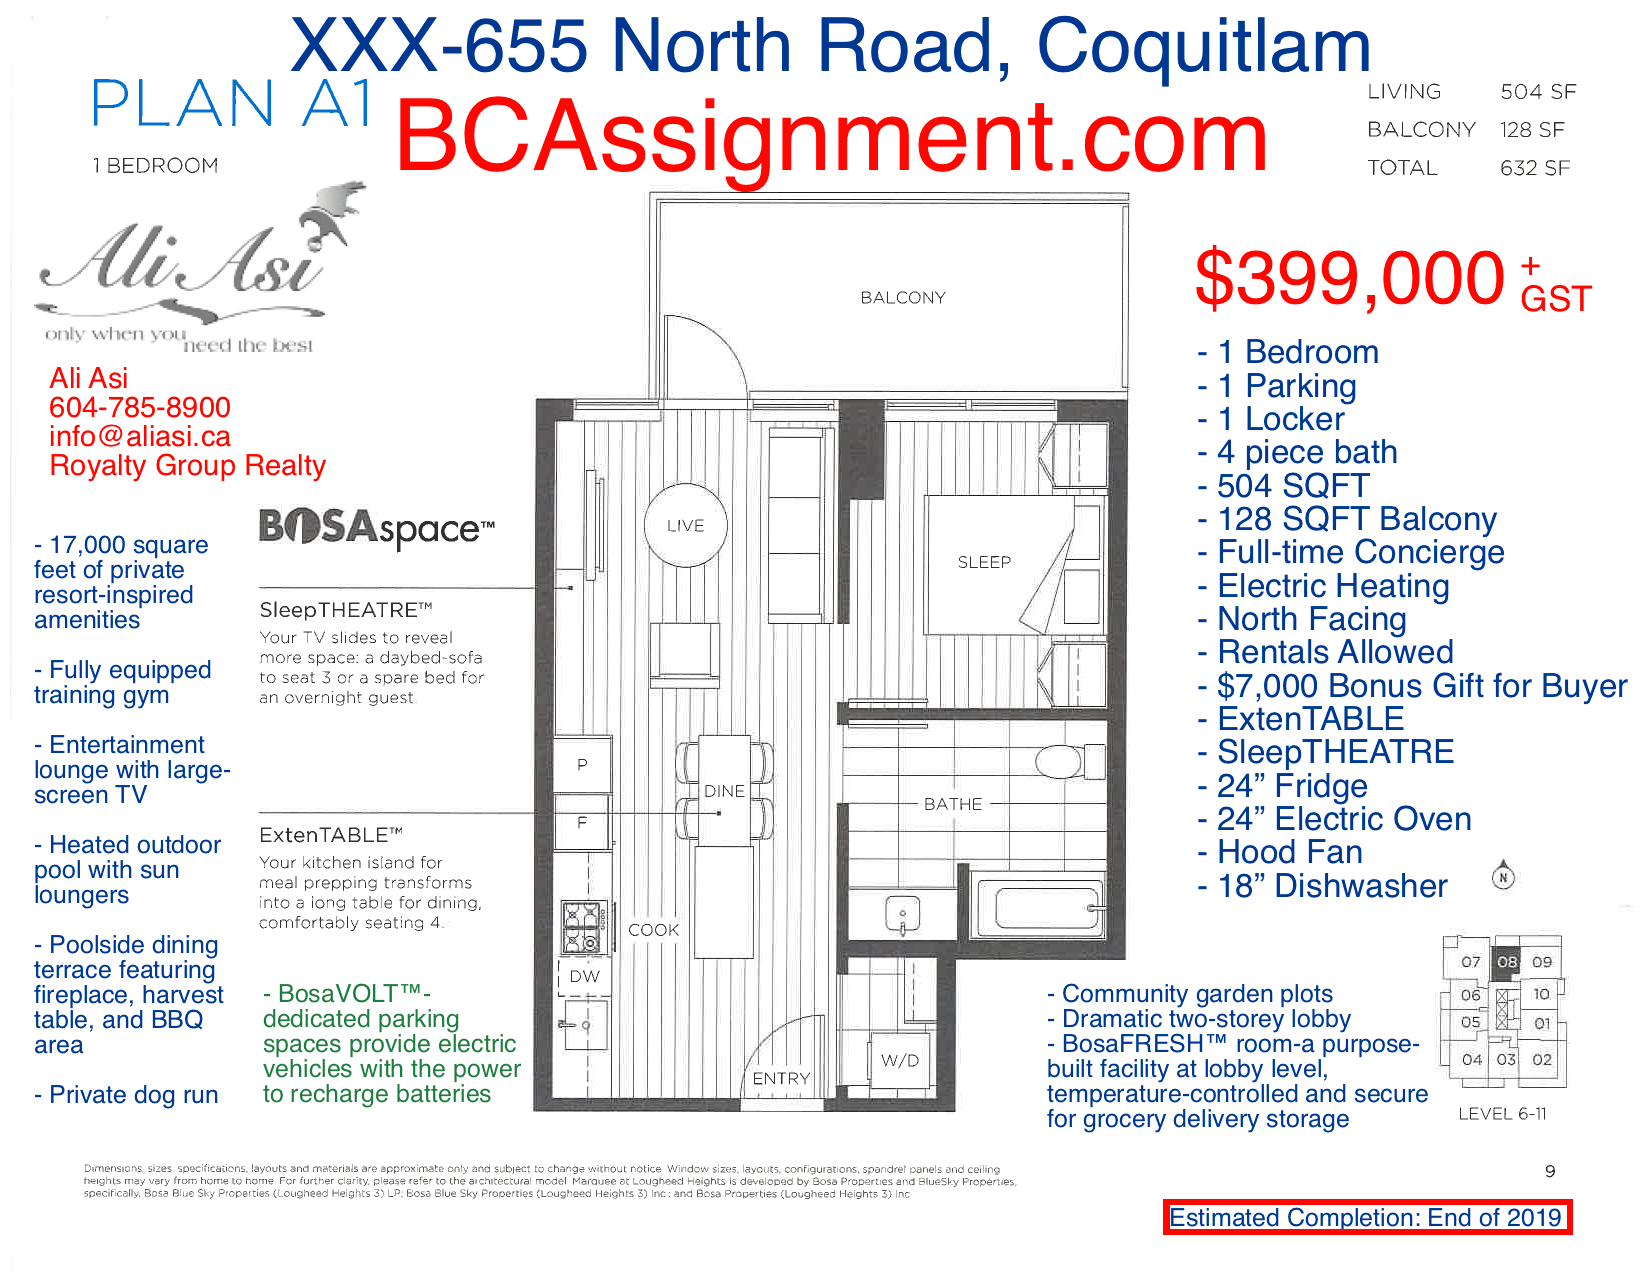 I have sold a property at *** 655 North RD in Coquitlam
